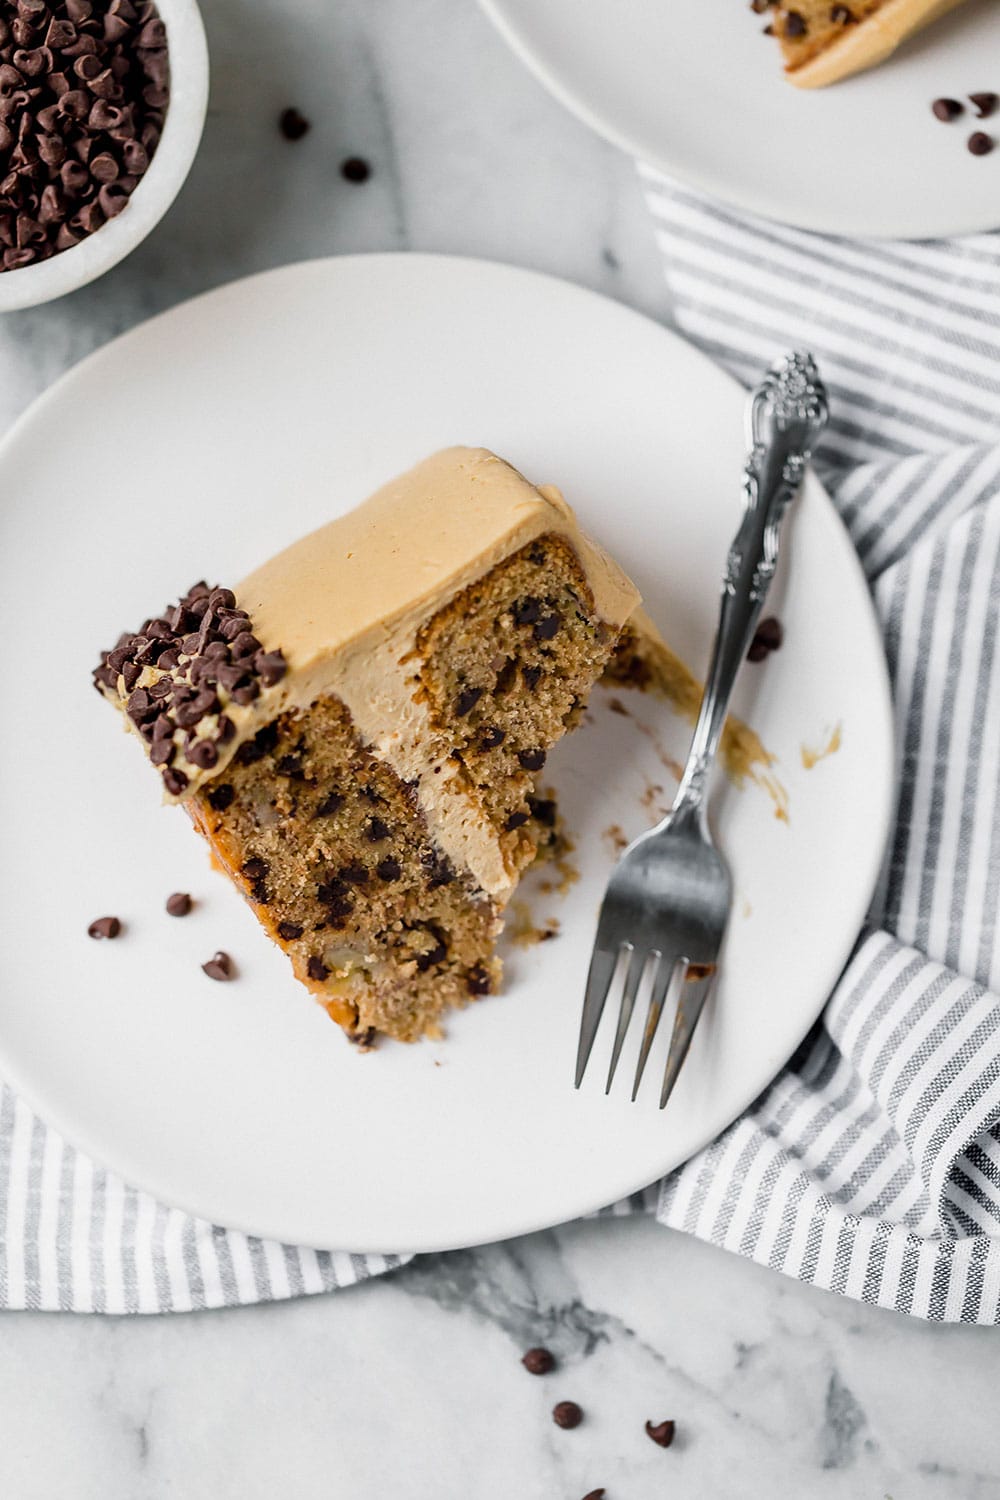 Bursting with sweet flavors, Banana Chocolate Chip Cake with Peanut Butter Frosting is a huge crowd-pleaser and better than any store-bought cake. Love!